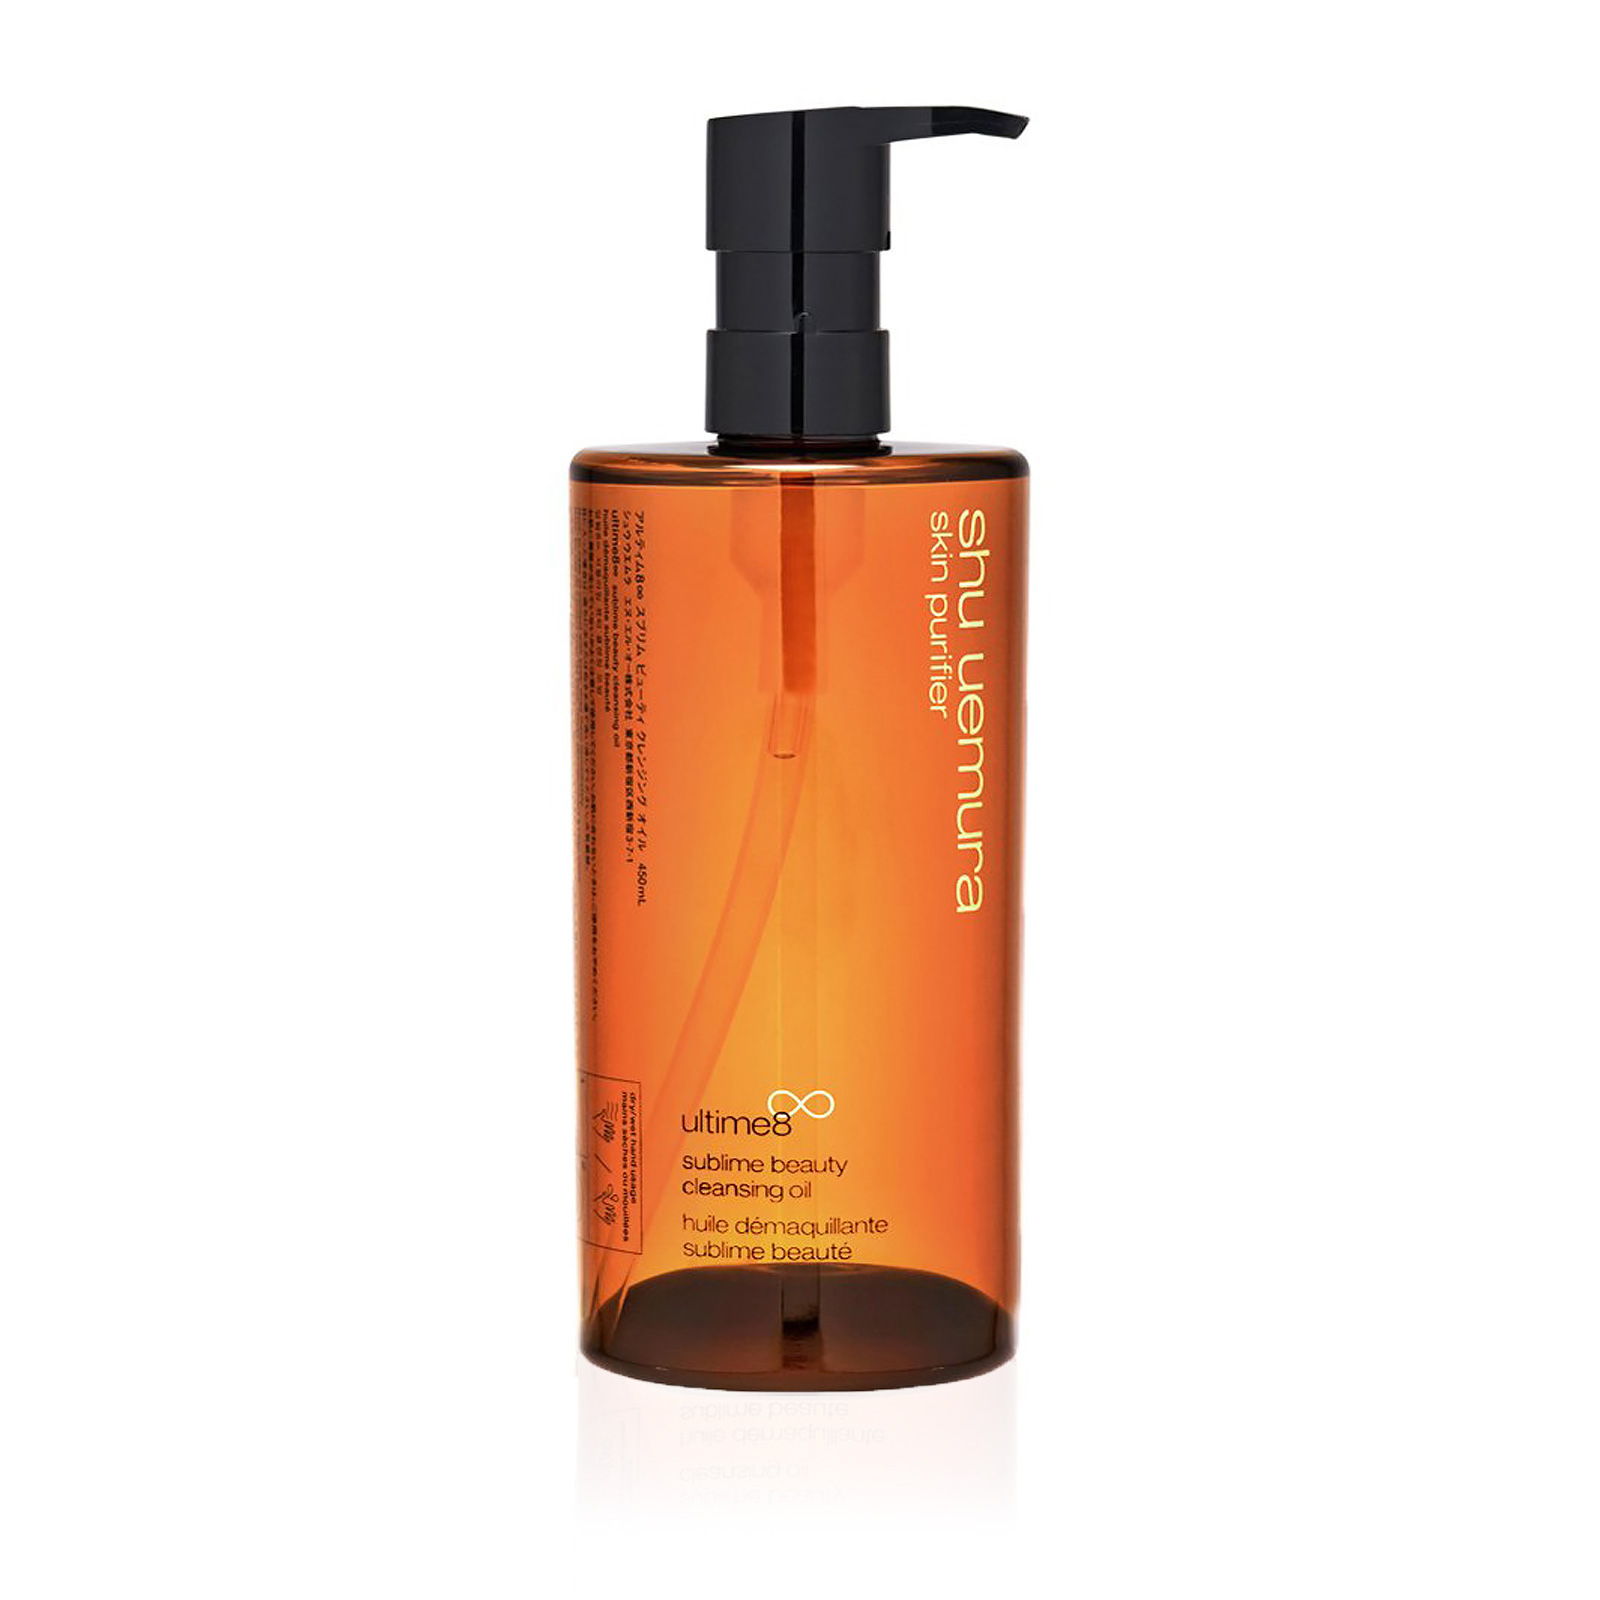 ultime8 Sublime Beauty Cleansing Oil